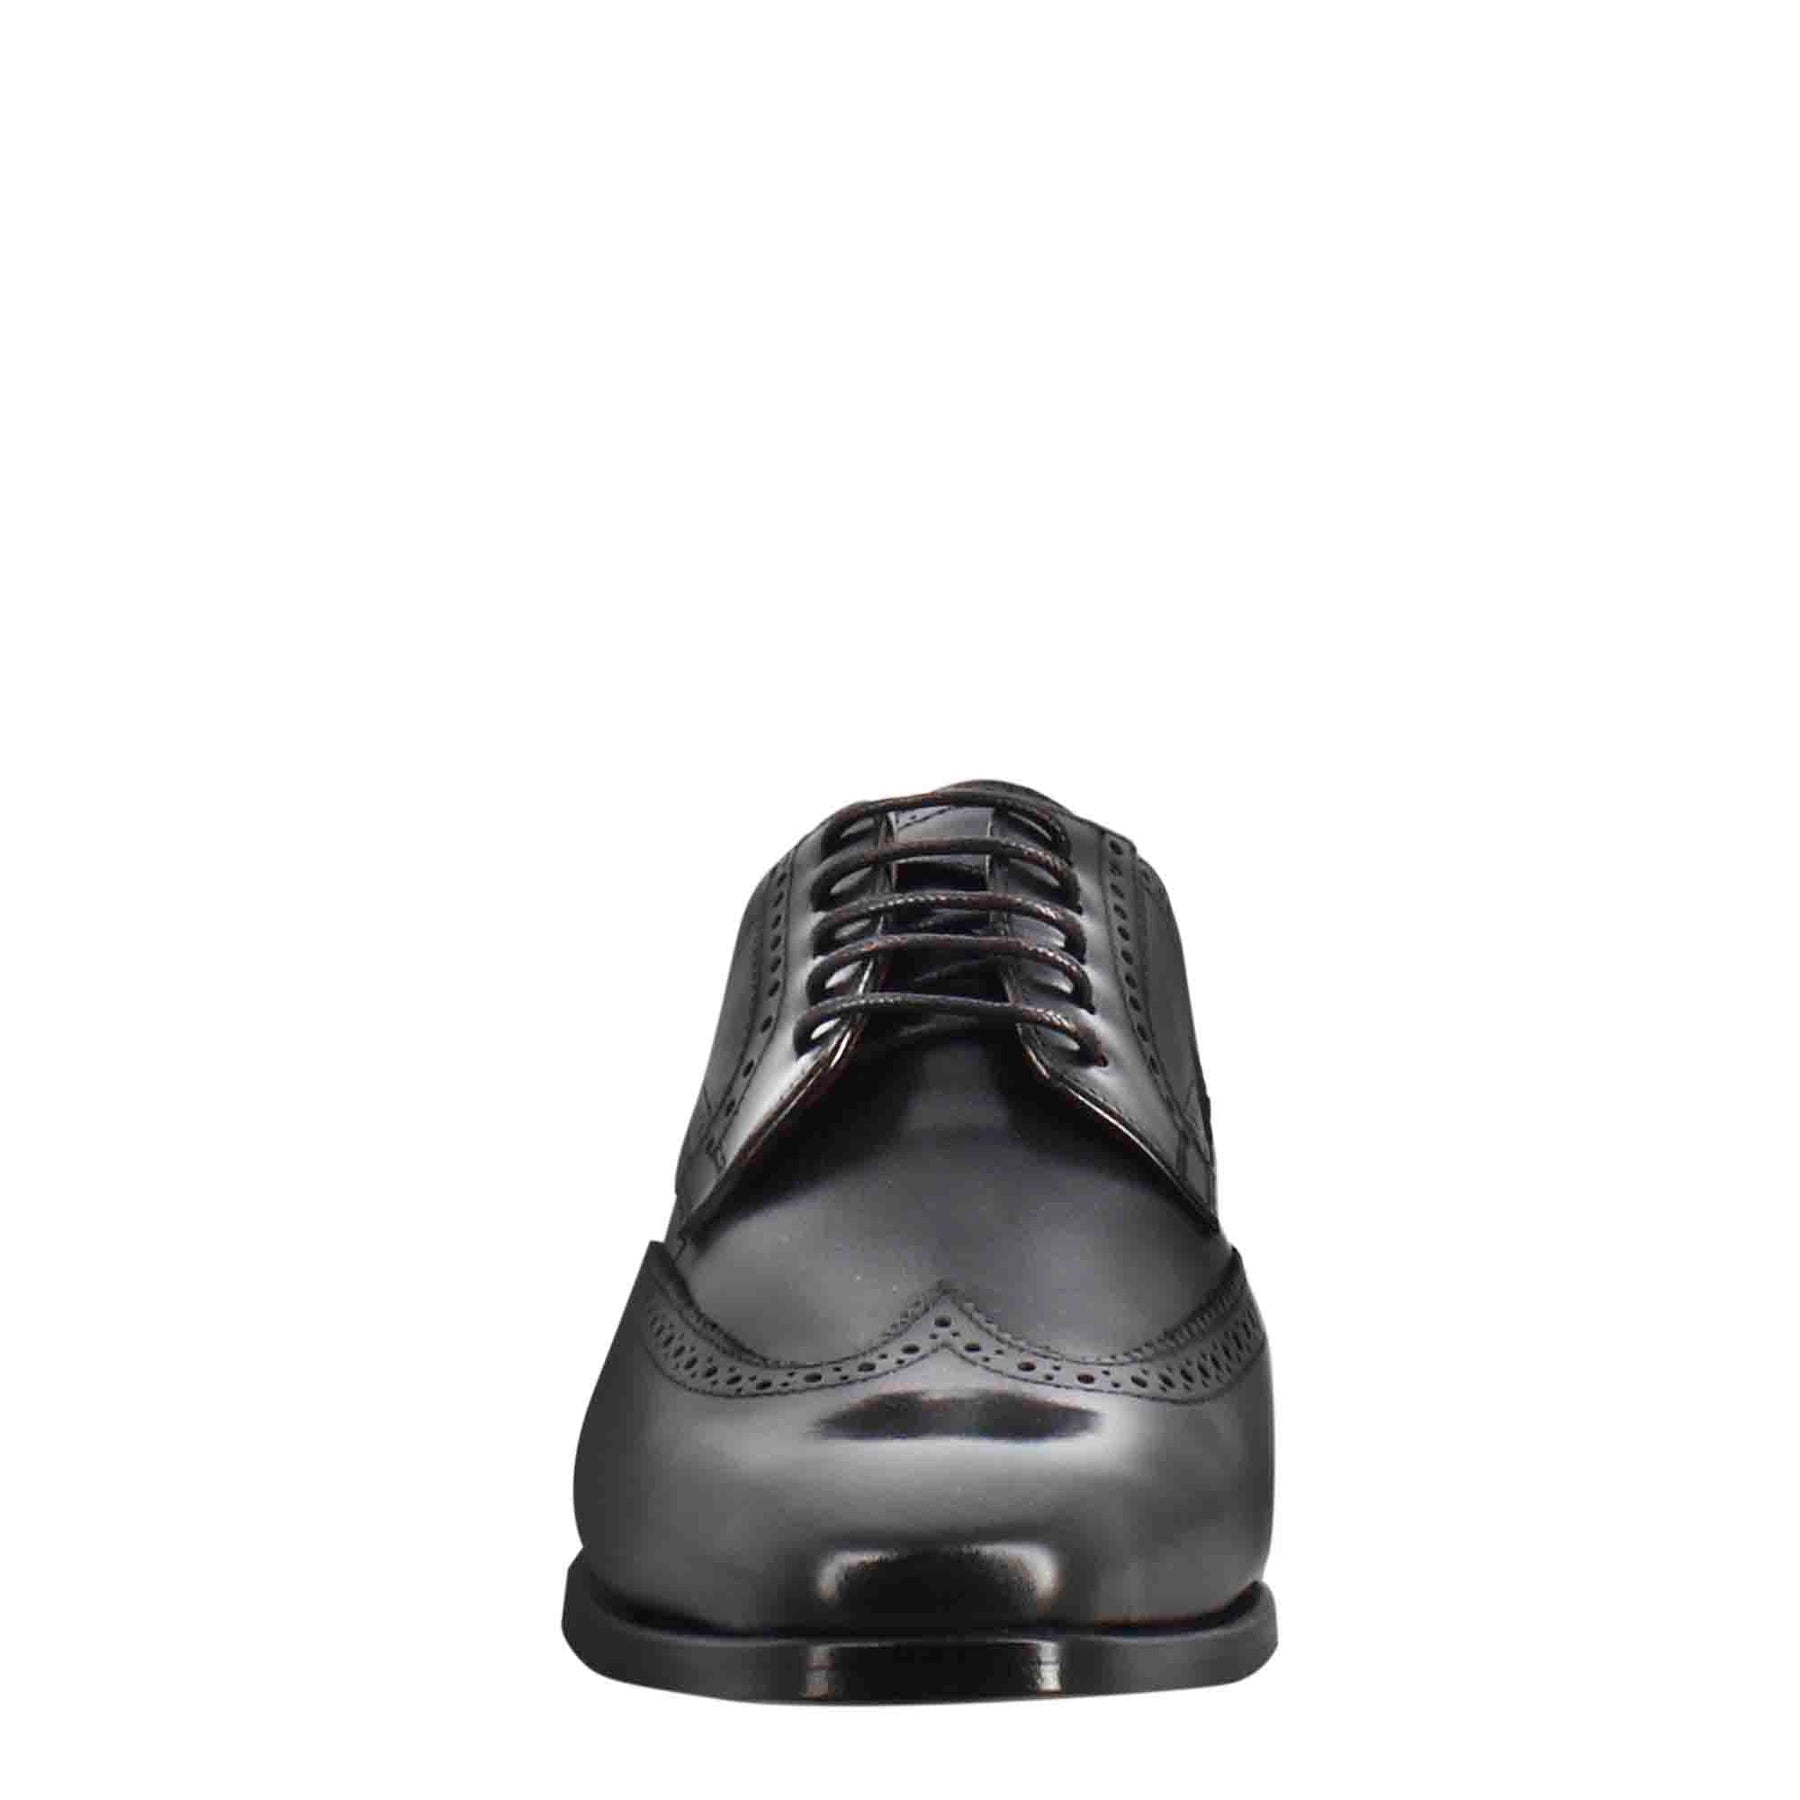 Men's black leather derby with dovetail and square toe